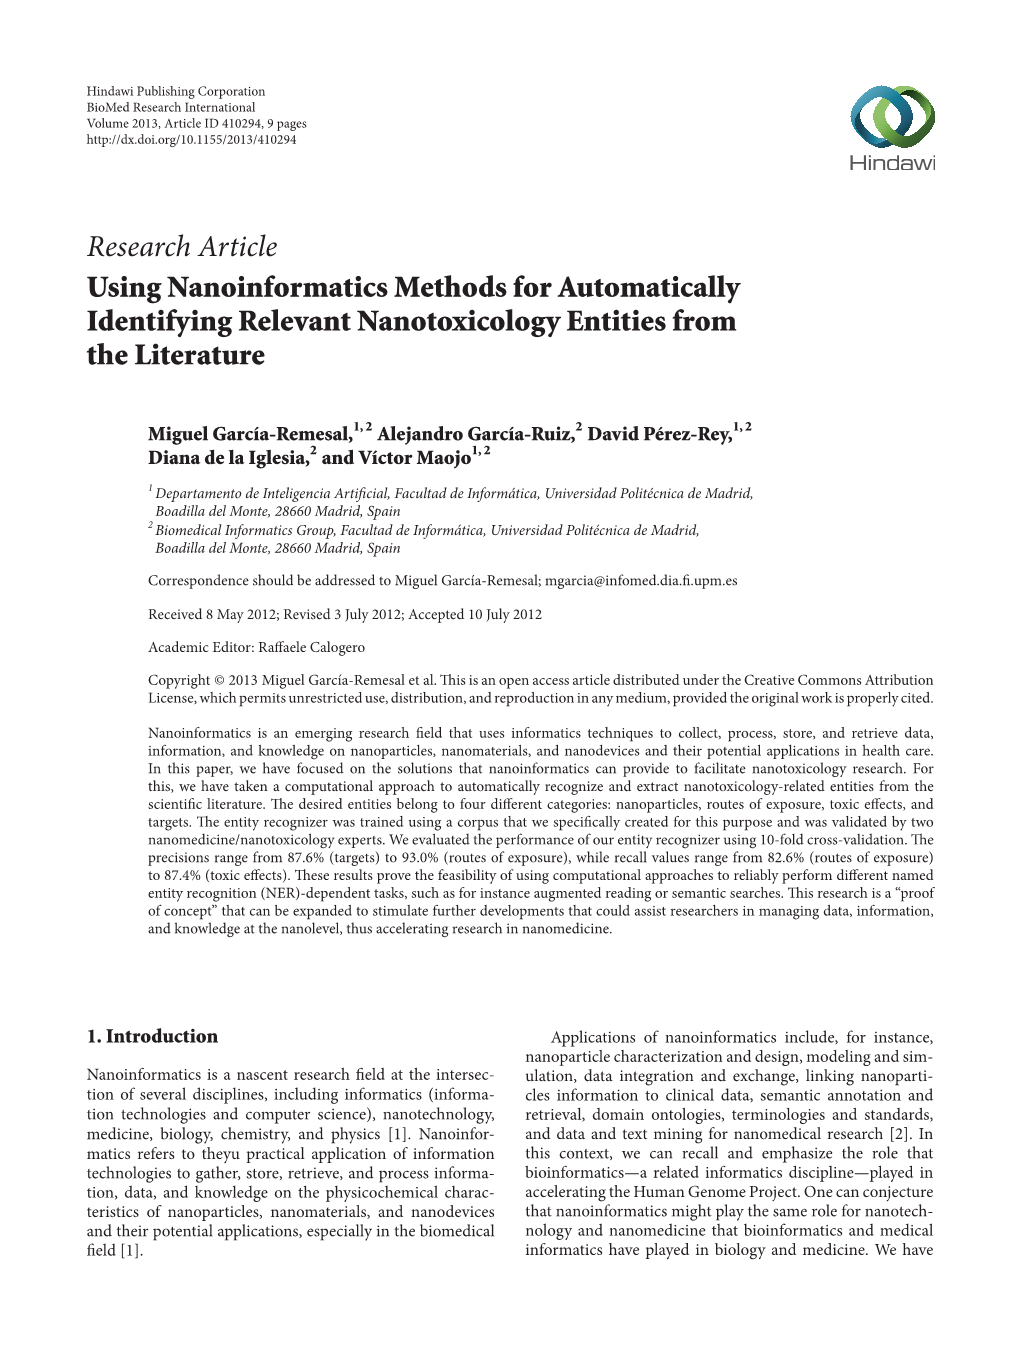 Research Article Using Nanoinformatics Methods for Automatically Identifying Relevant Nanotoxicology Entities from the Literature